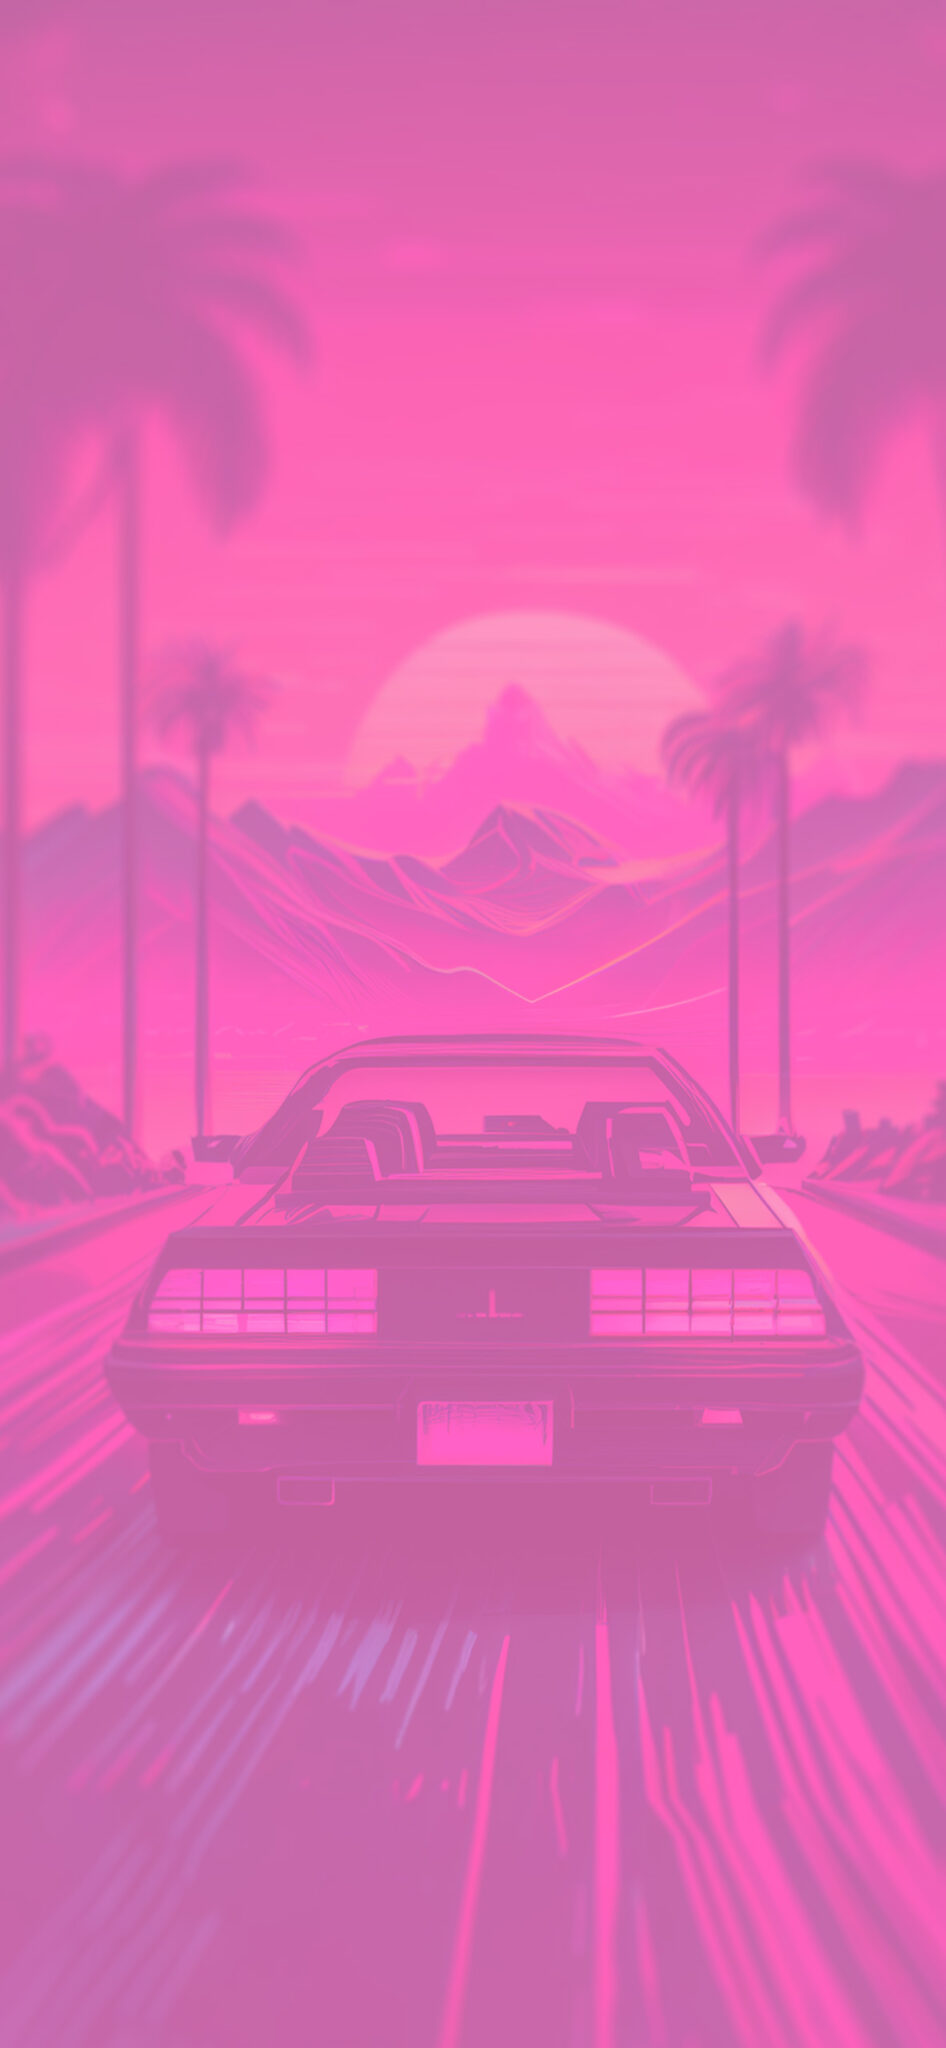 Synthwave Car on the Road Wallpapers - Synthwave Wallpaper 4k